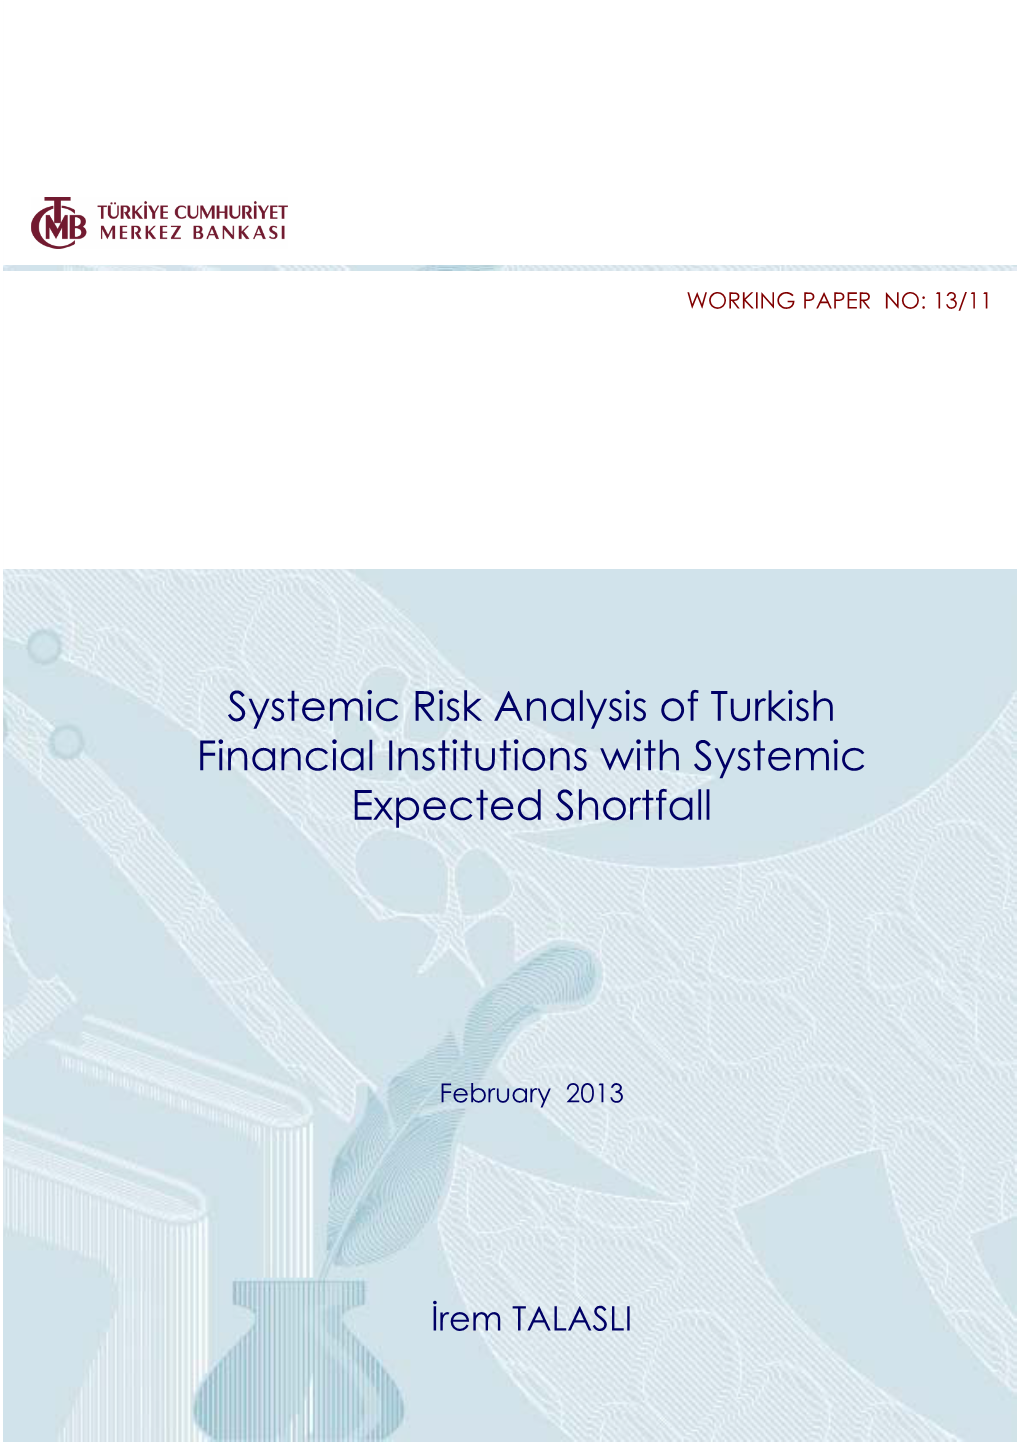 Systemic Risk Analysis of Turkish Financial Institutions with Systemic Expected Shortfall